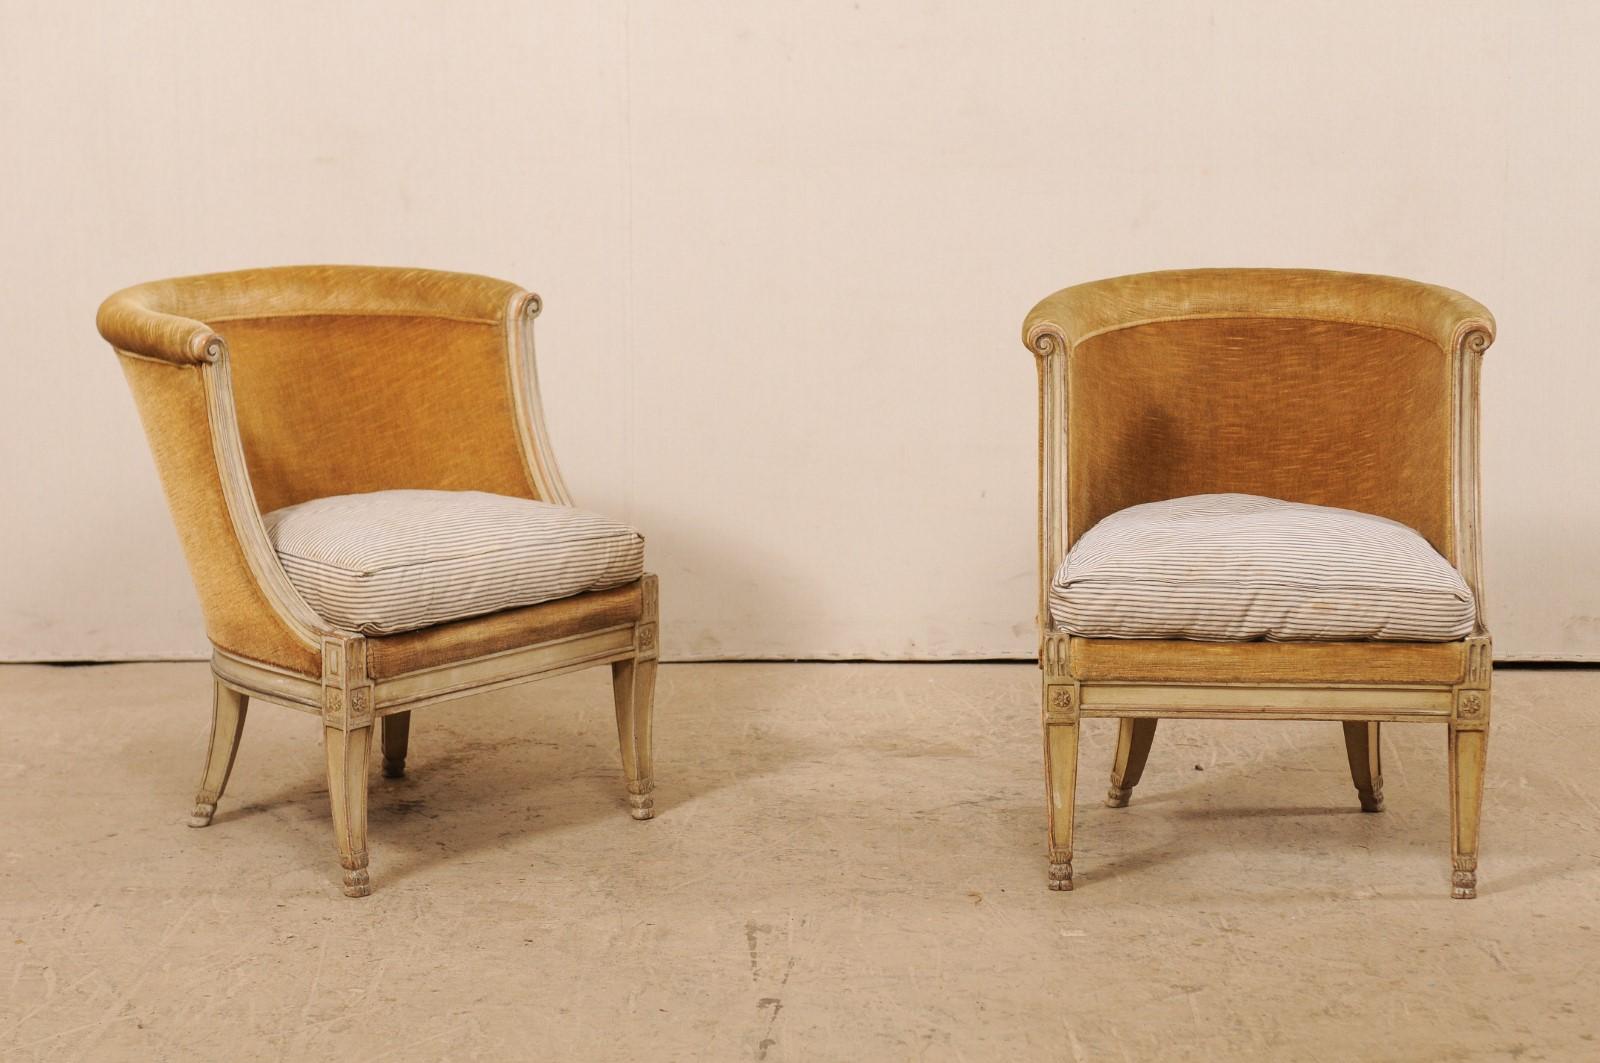 A pair of French barrel back club chairs from the early 20th century. This antique pair of bergères occasional chairs from France have upholstered and barrel backs with rounded top rail, and volute carvings at either top side. The seat rail is